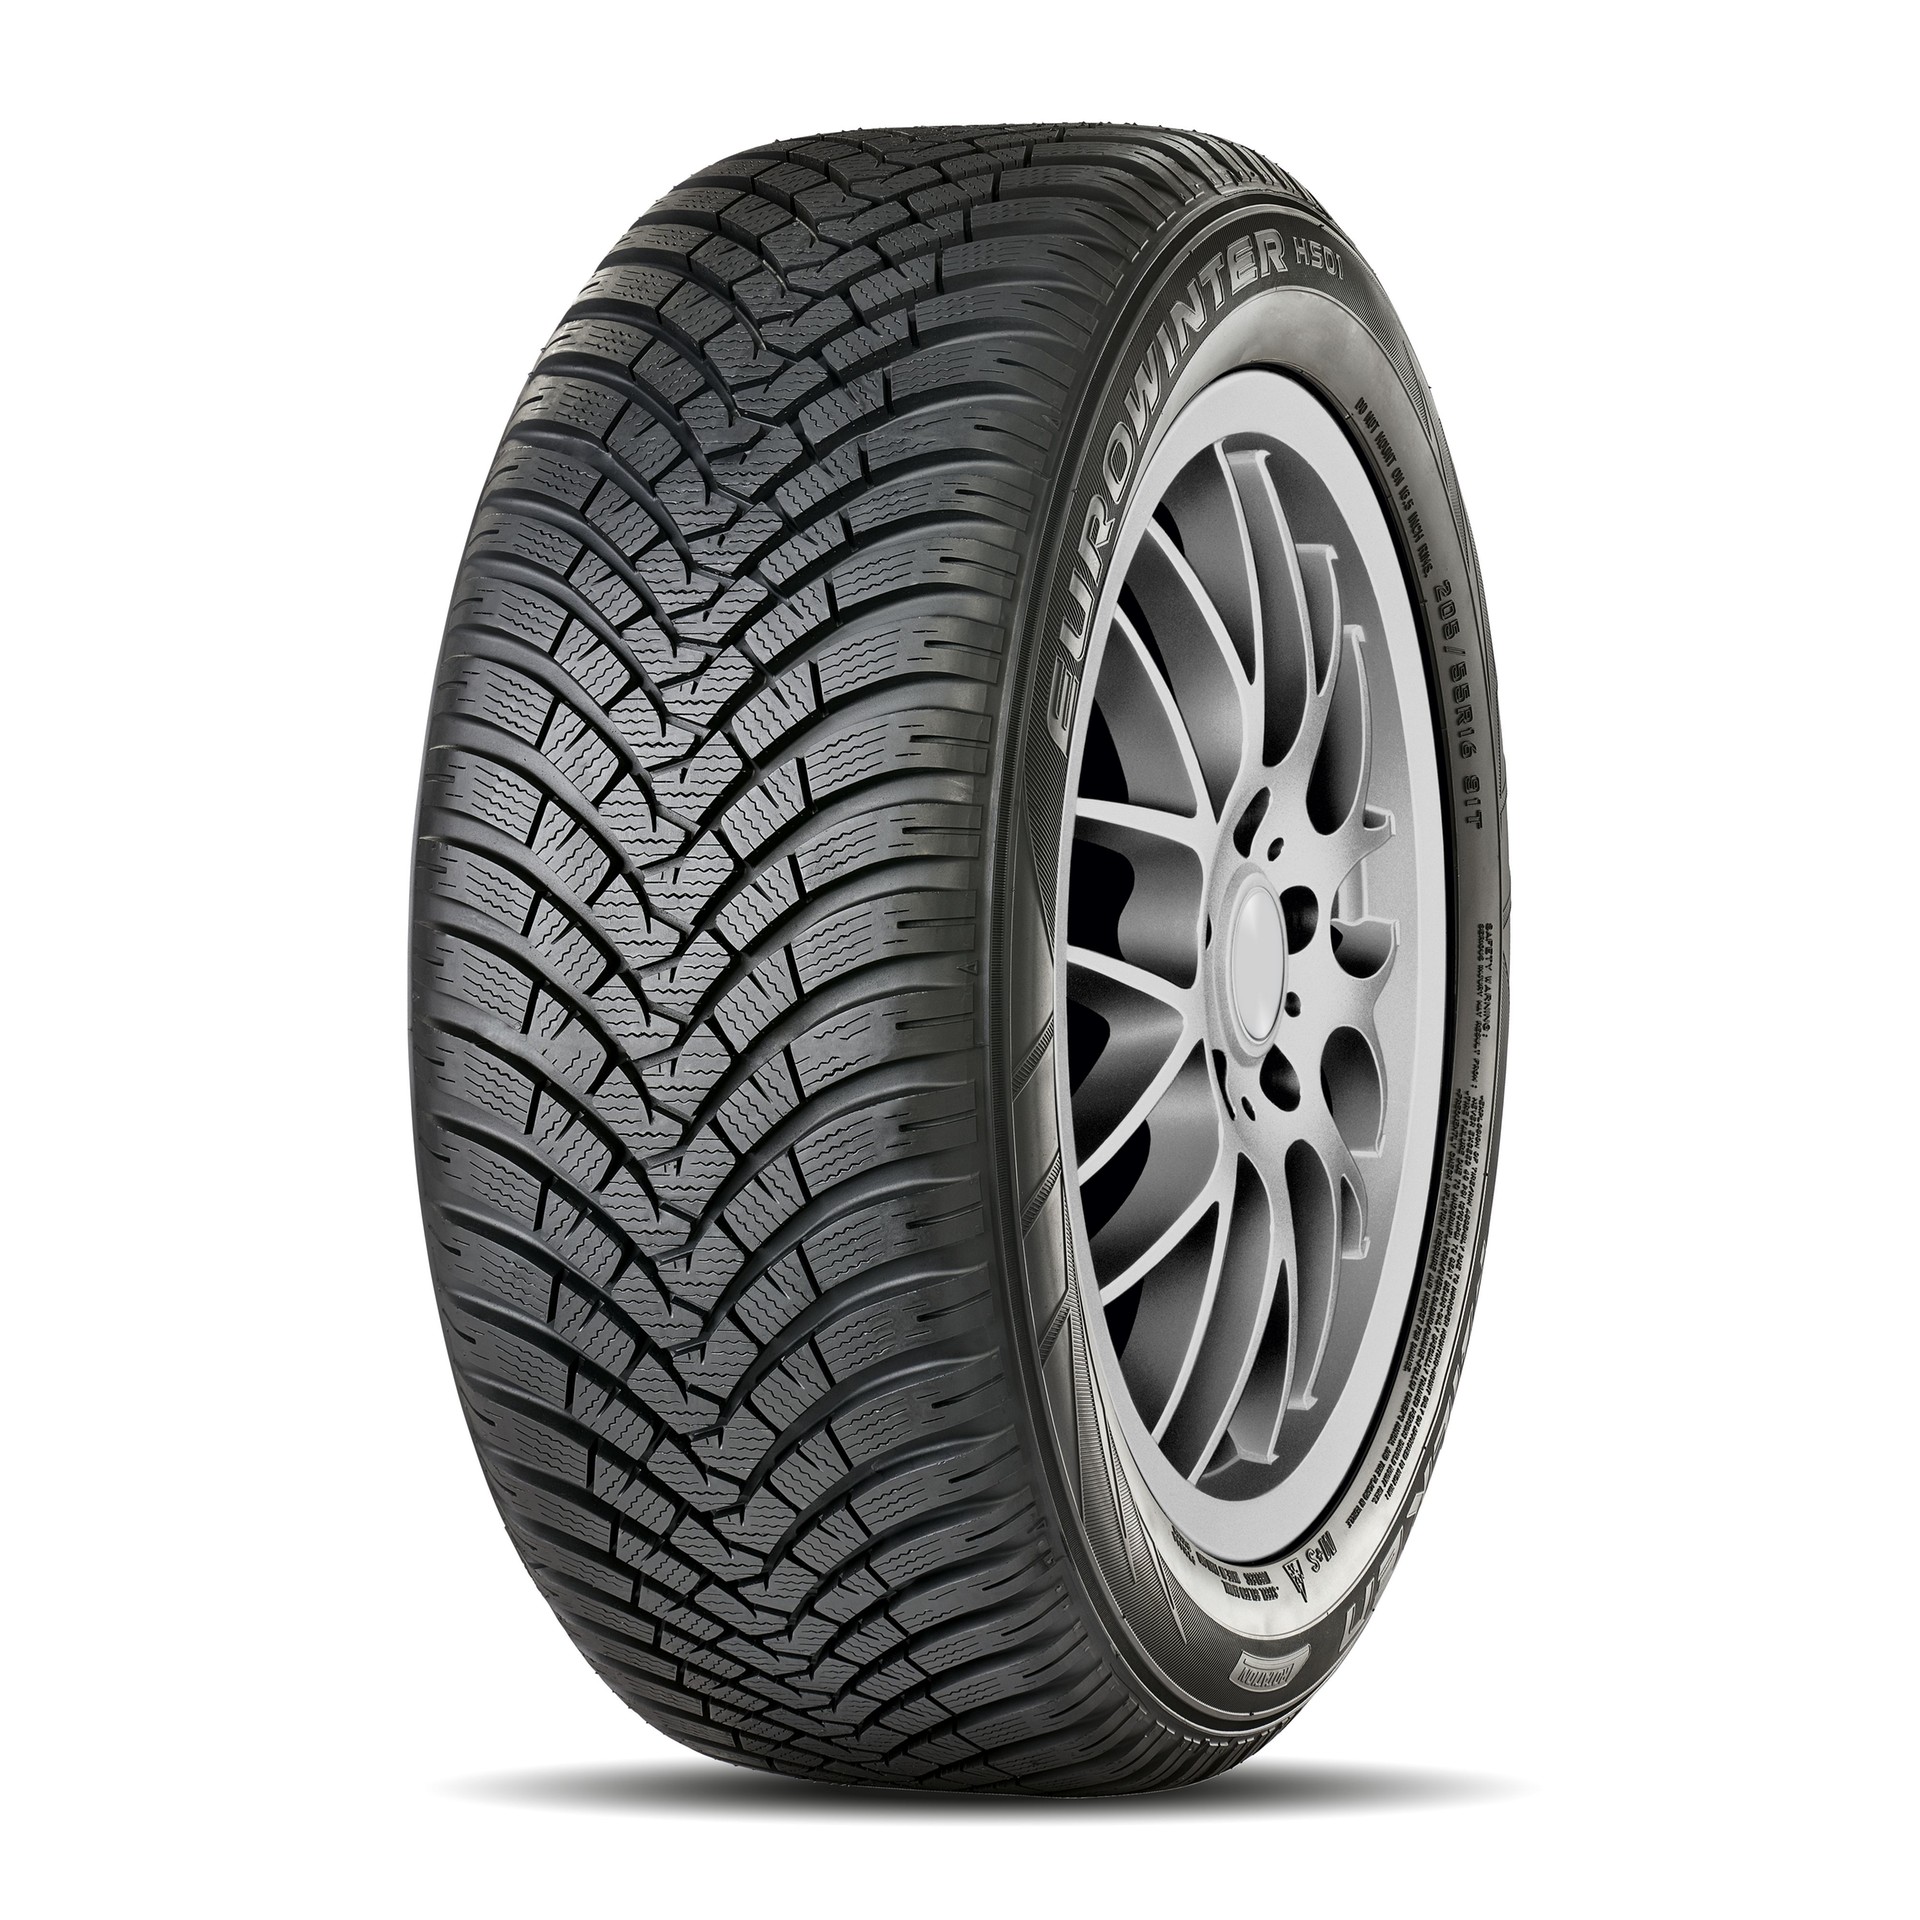 Falken Eurowinter Tests Tire and Reviews HS01 